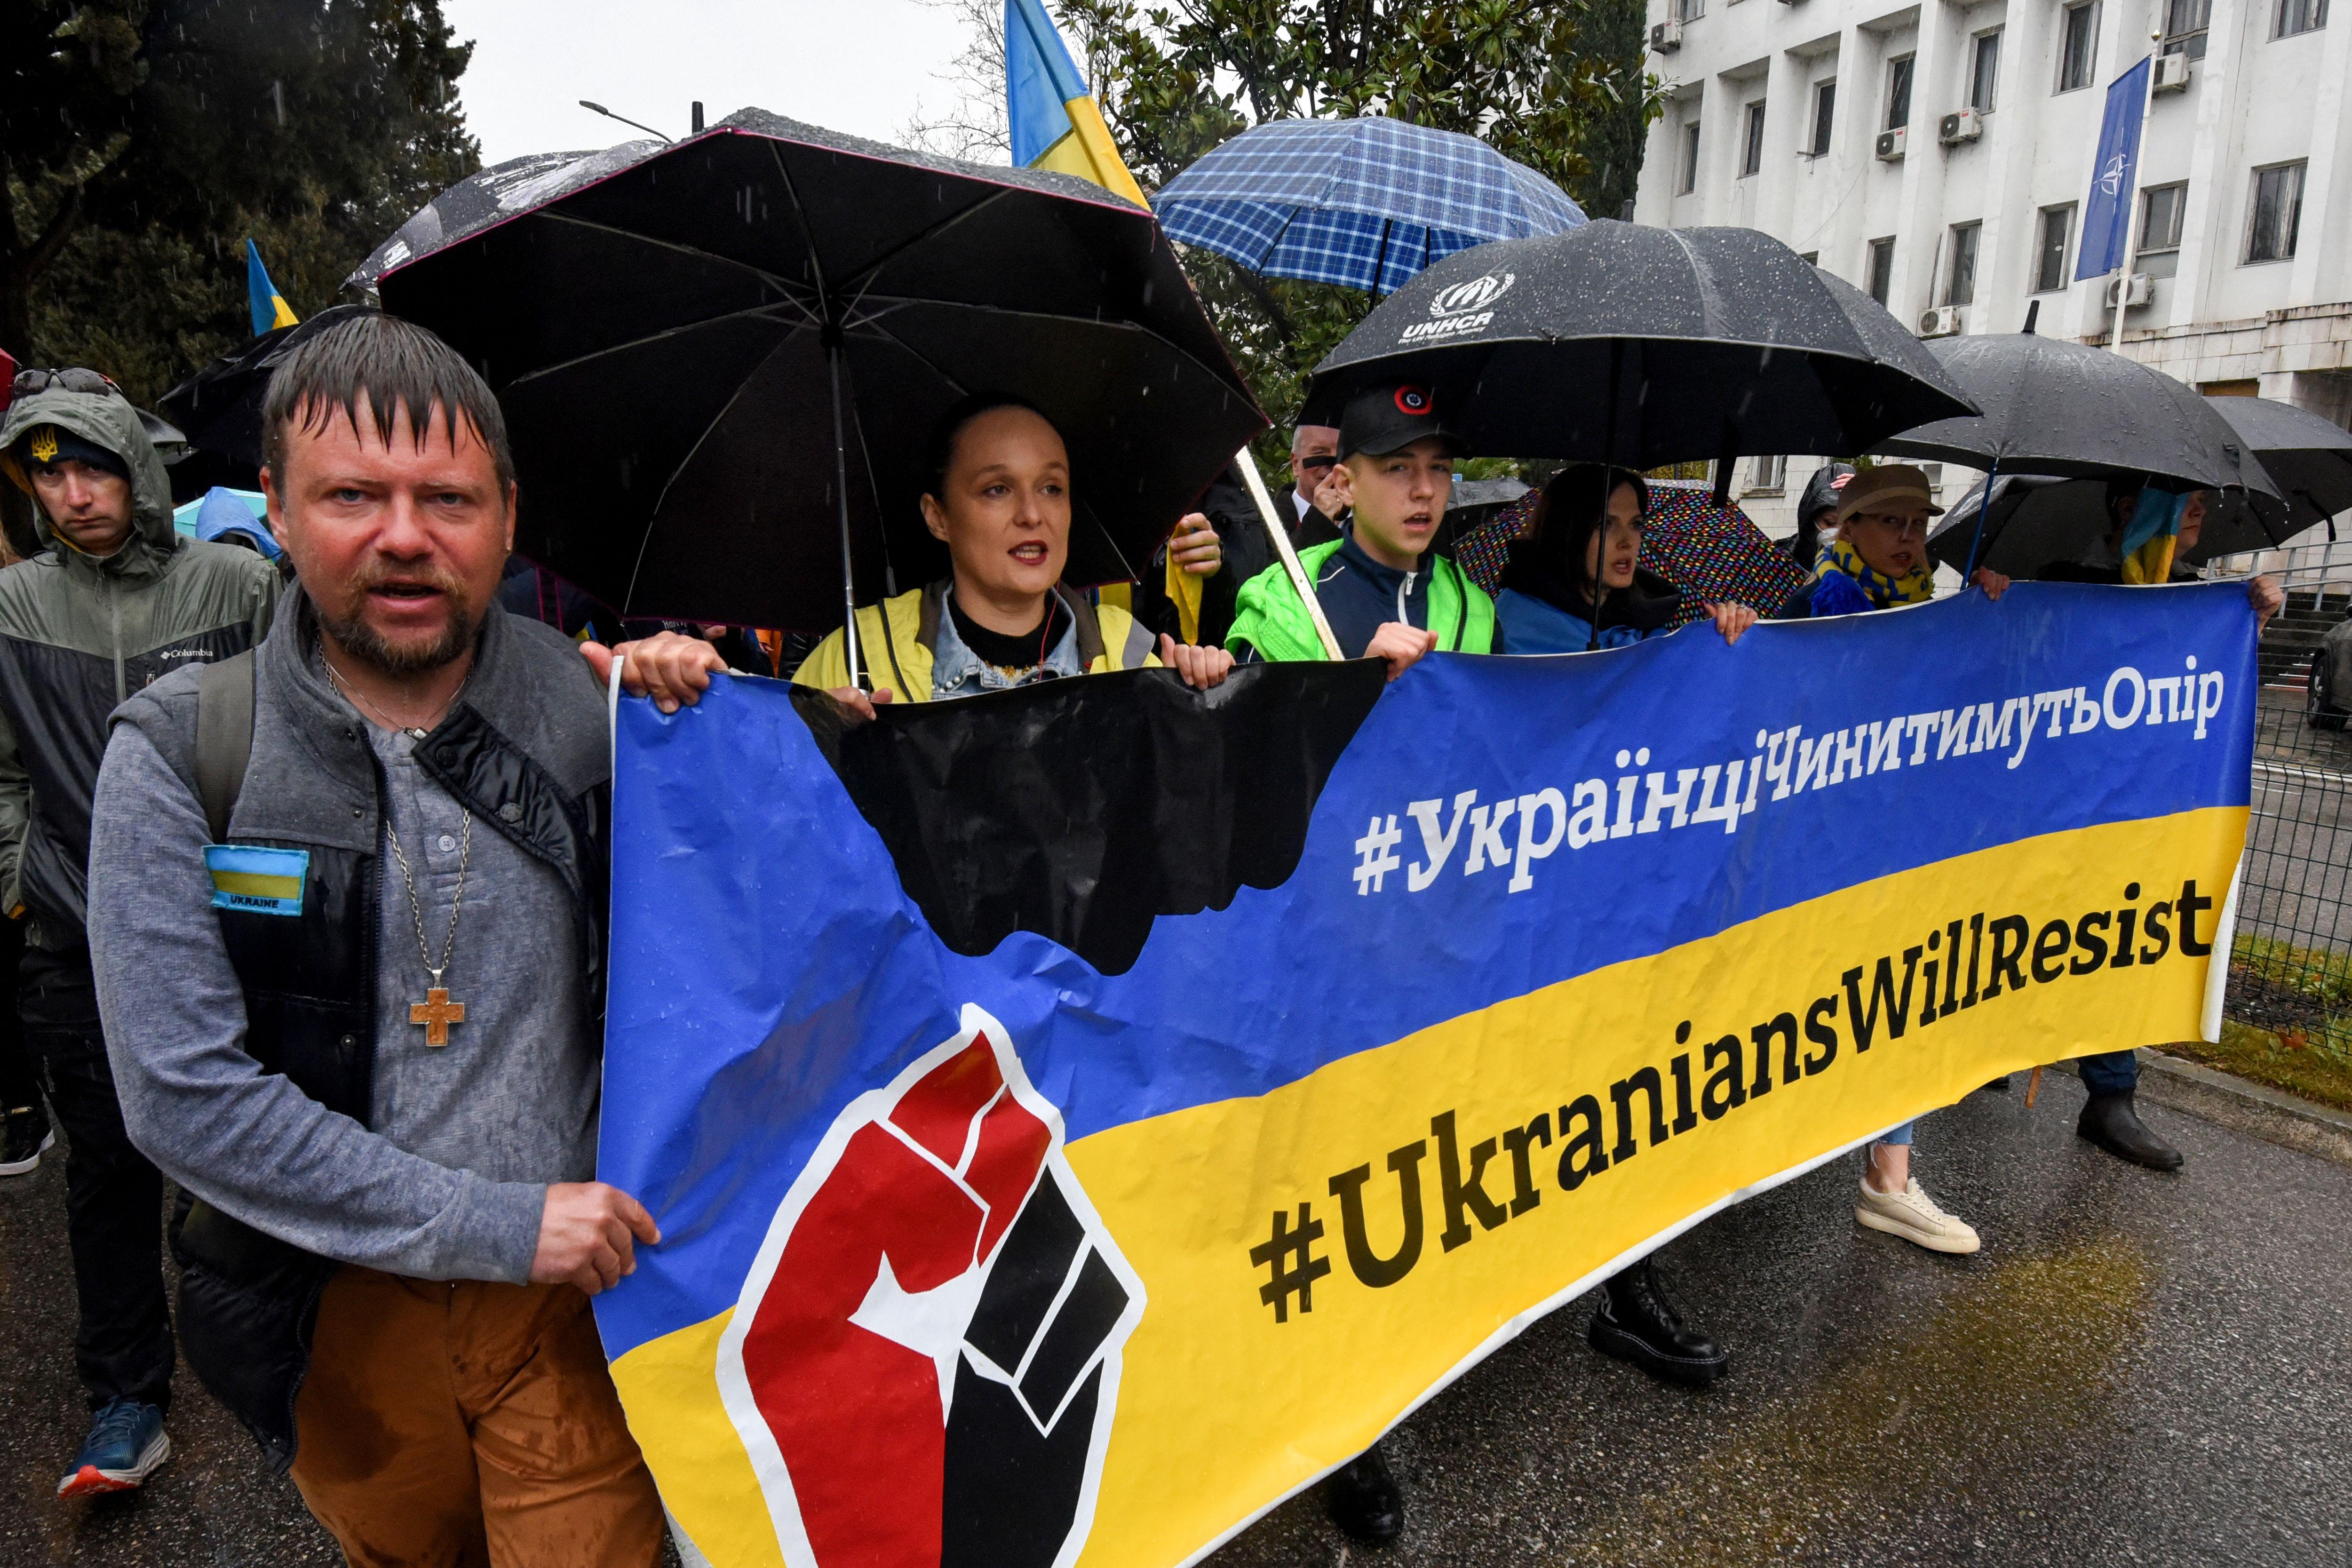 Several people hold a large, long sign that says #UkrainiansWillResist. Some are carrying umbrellas; a man on the end without an umbrella is soaking wet. 